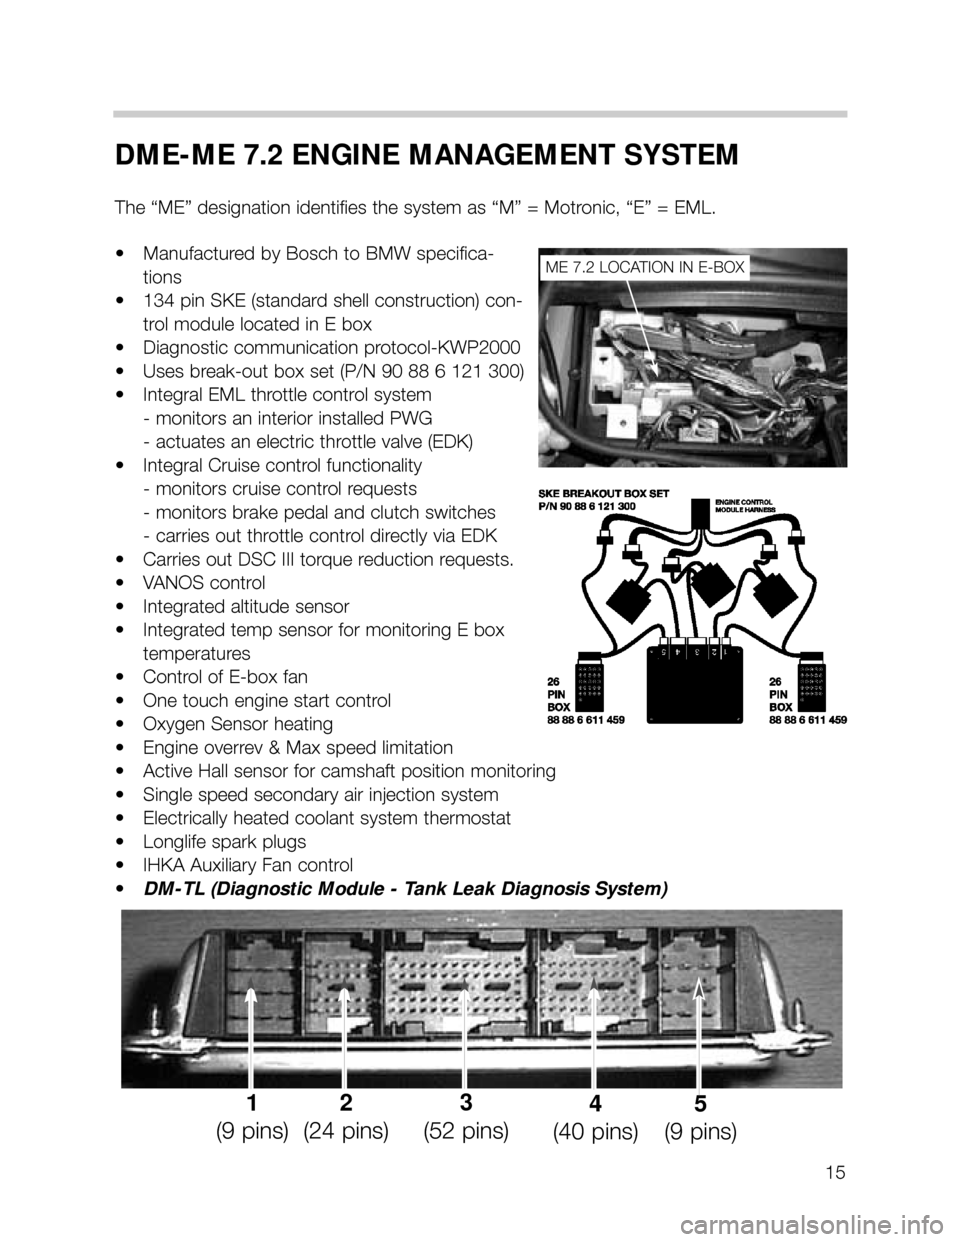 BMW 735i 2001 E38 M62TU Engine Workshop Manual 15
DME-ME 7.2 ENGINE MANAGEMENT SYSTEM
The “ME” designation identifies the system as “M” = Motronic, “E” = EML.
• Manufactured by Bosch to BMW specifica-
tions
• 134 pin SKE (standard 